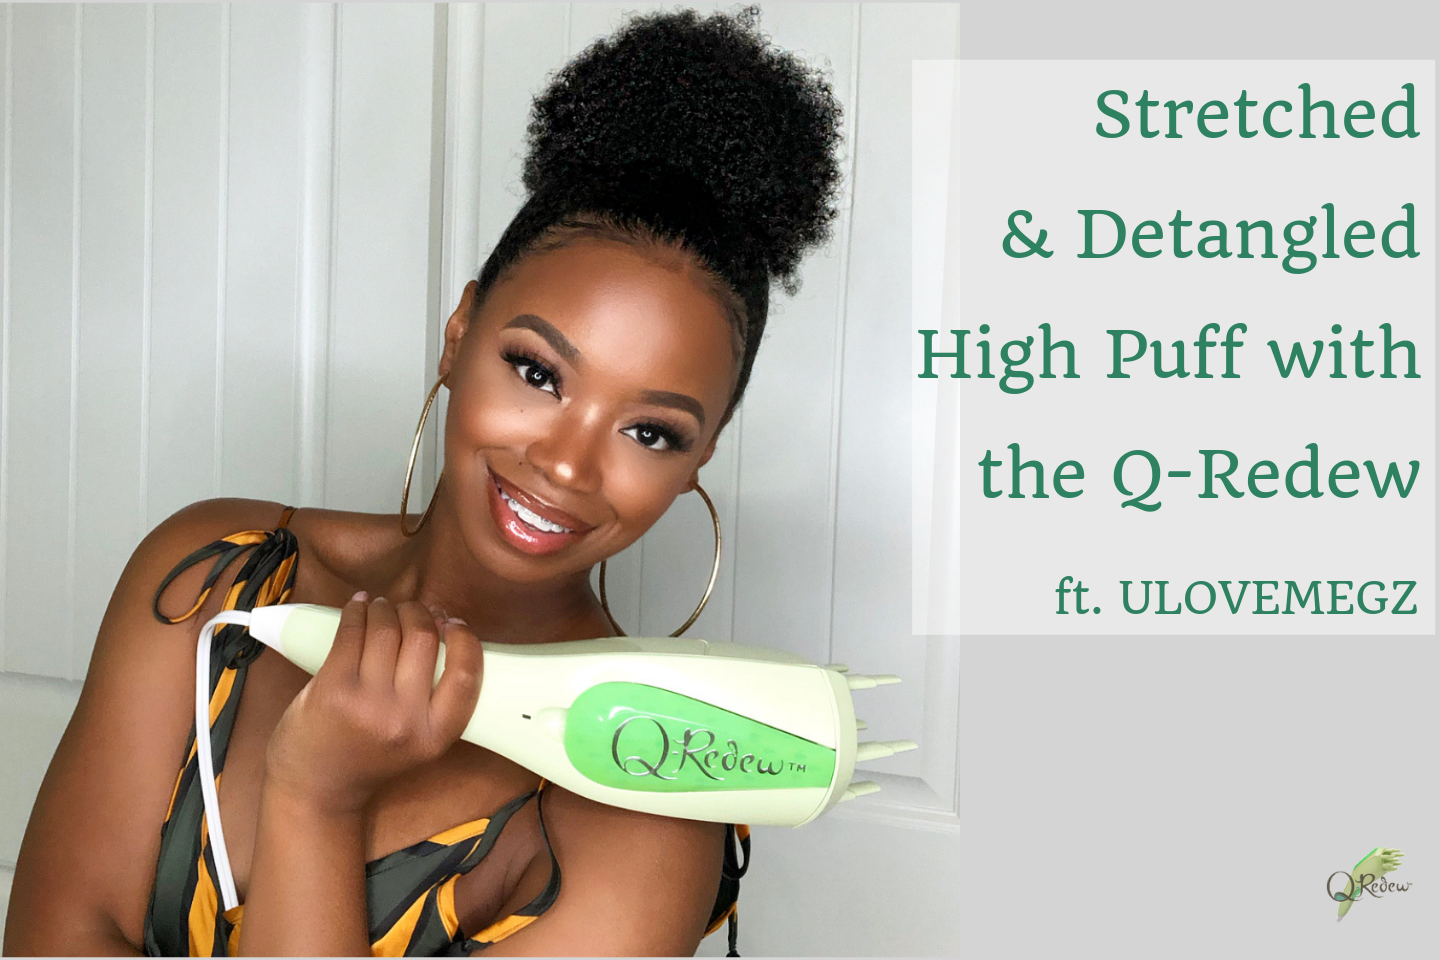 Stretched High Puff with the Q-Redew